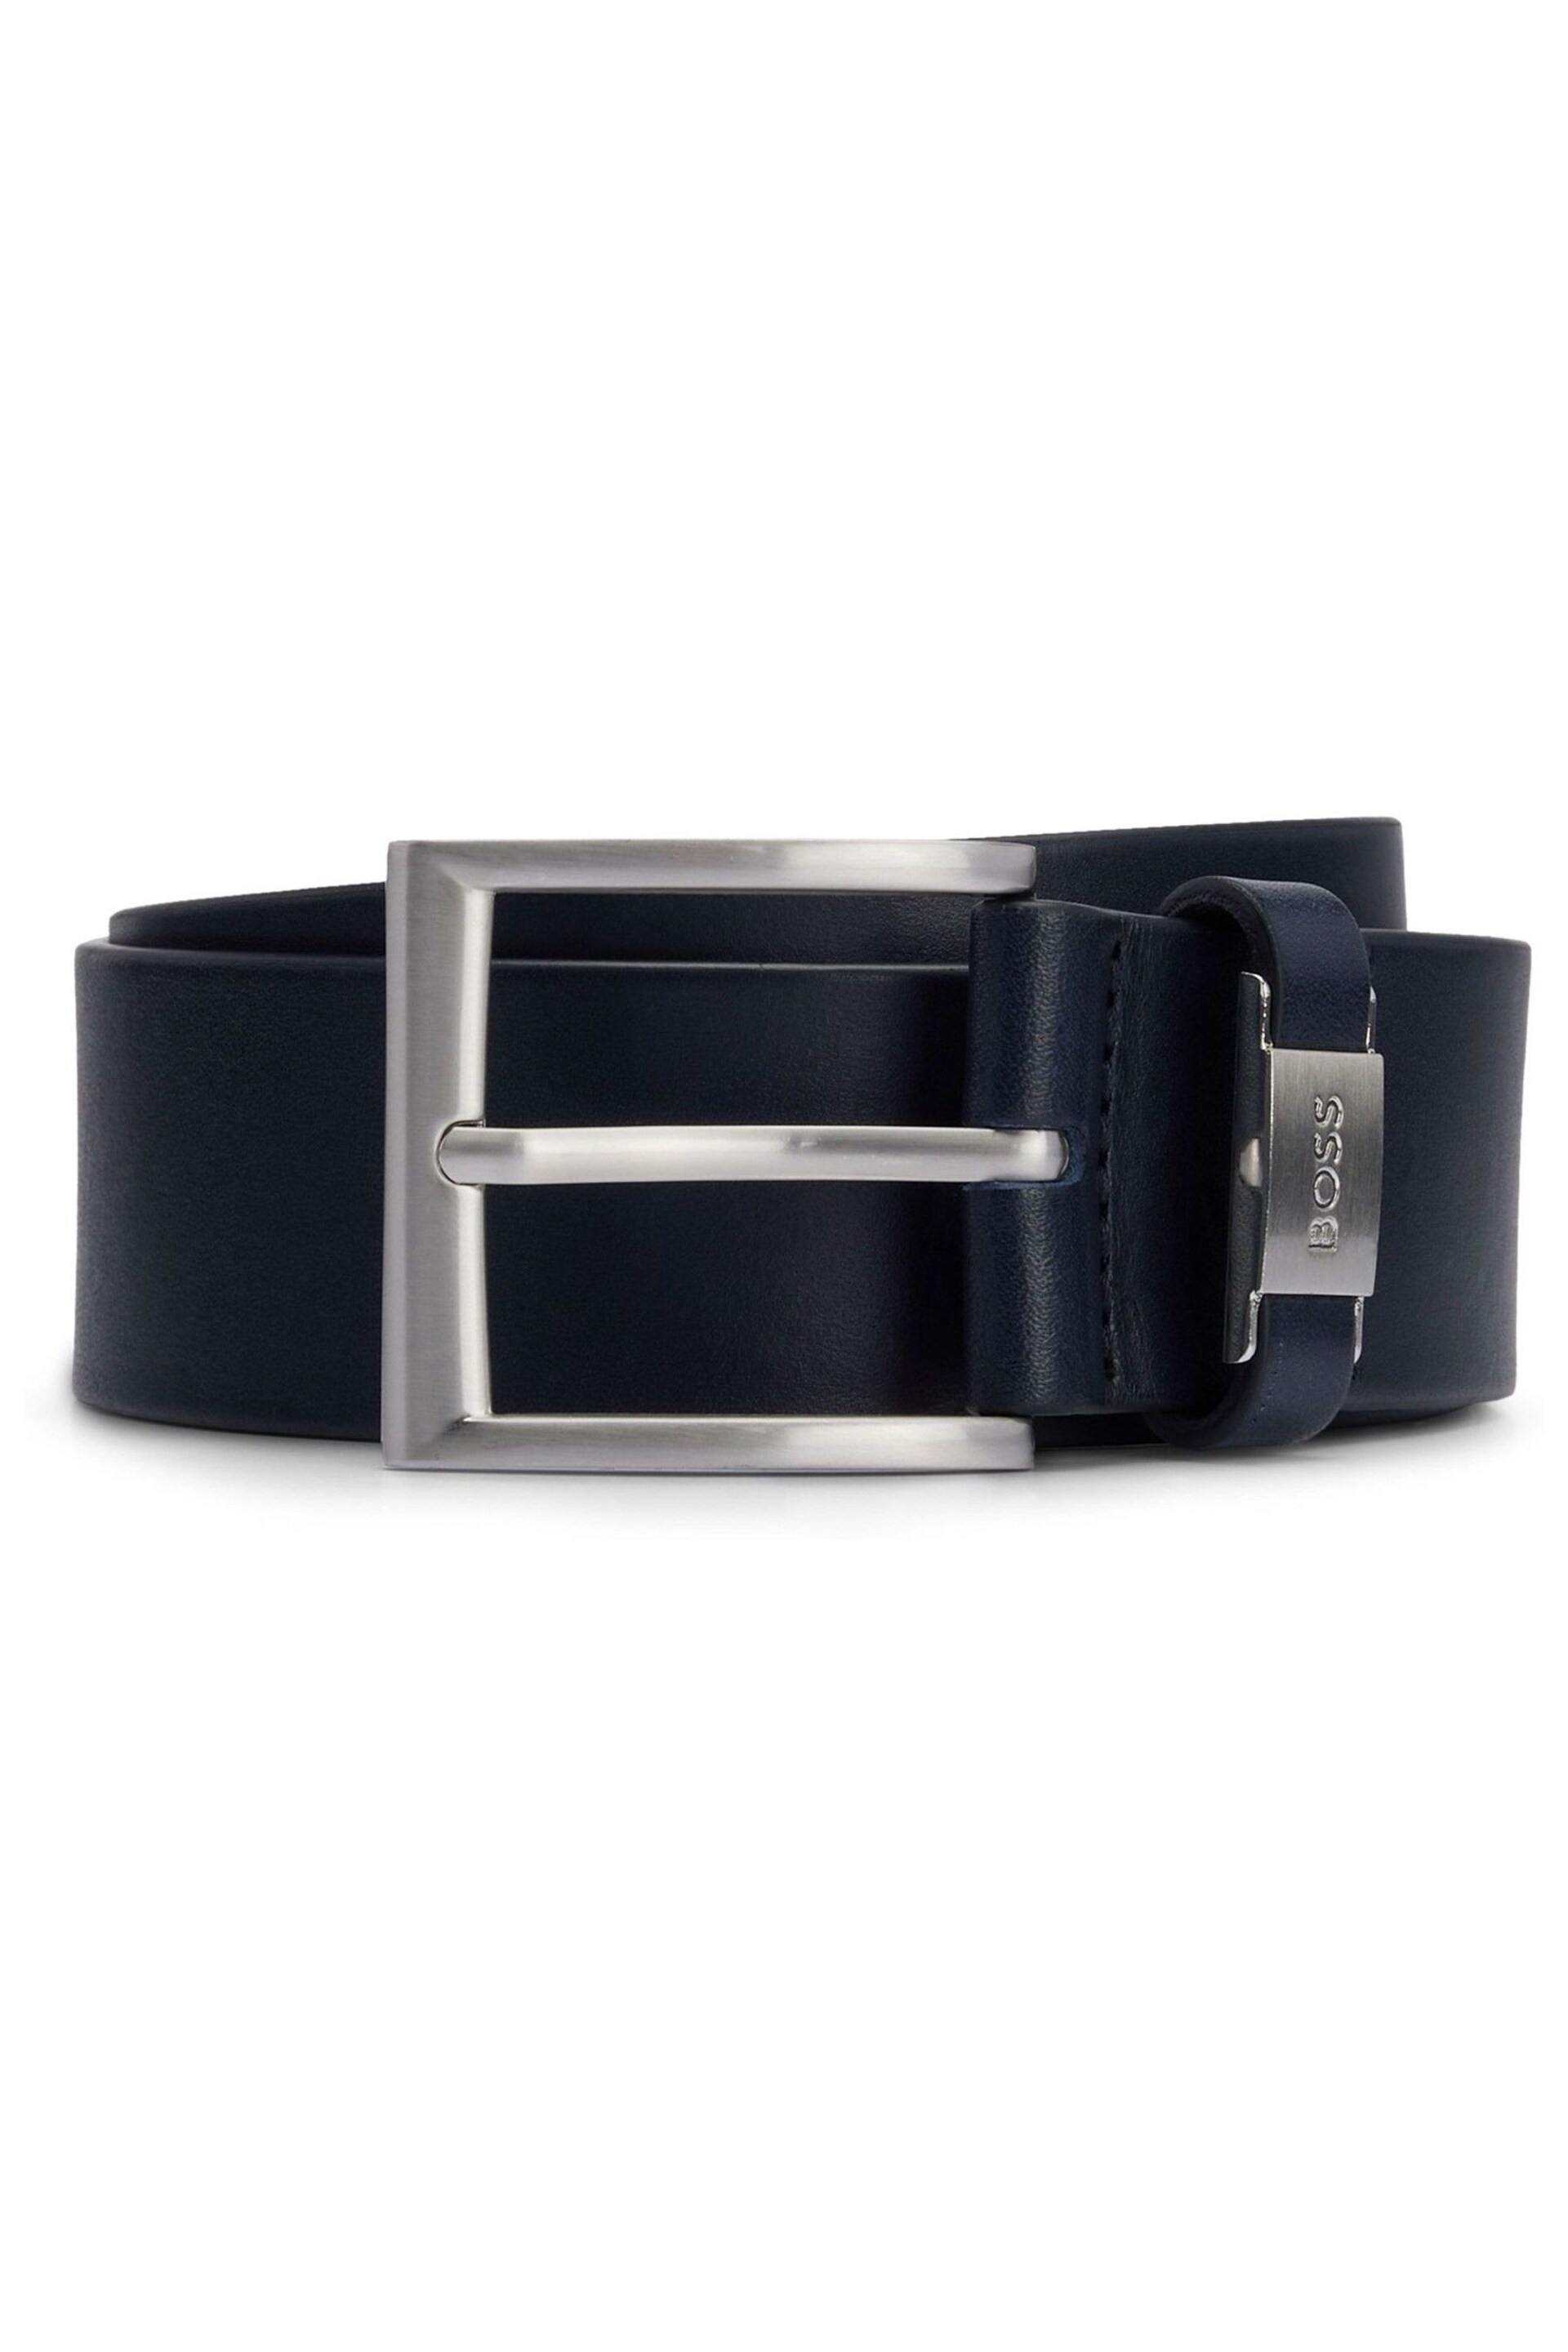 BOSS Navy Connio Smooth Leather Belt - Image 1 of 3